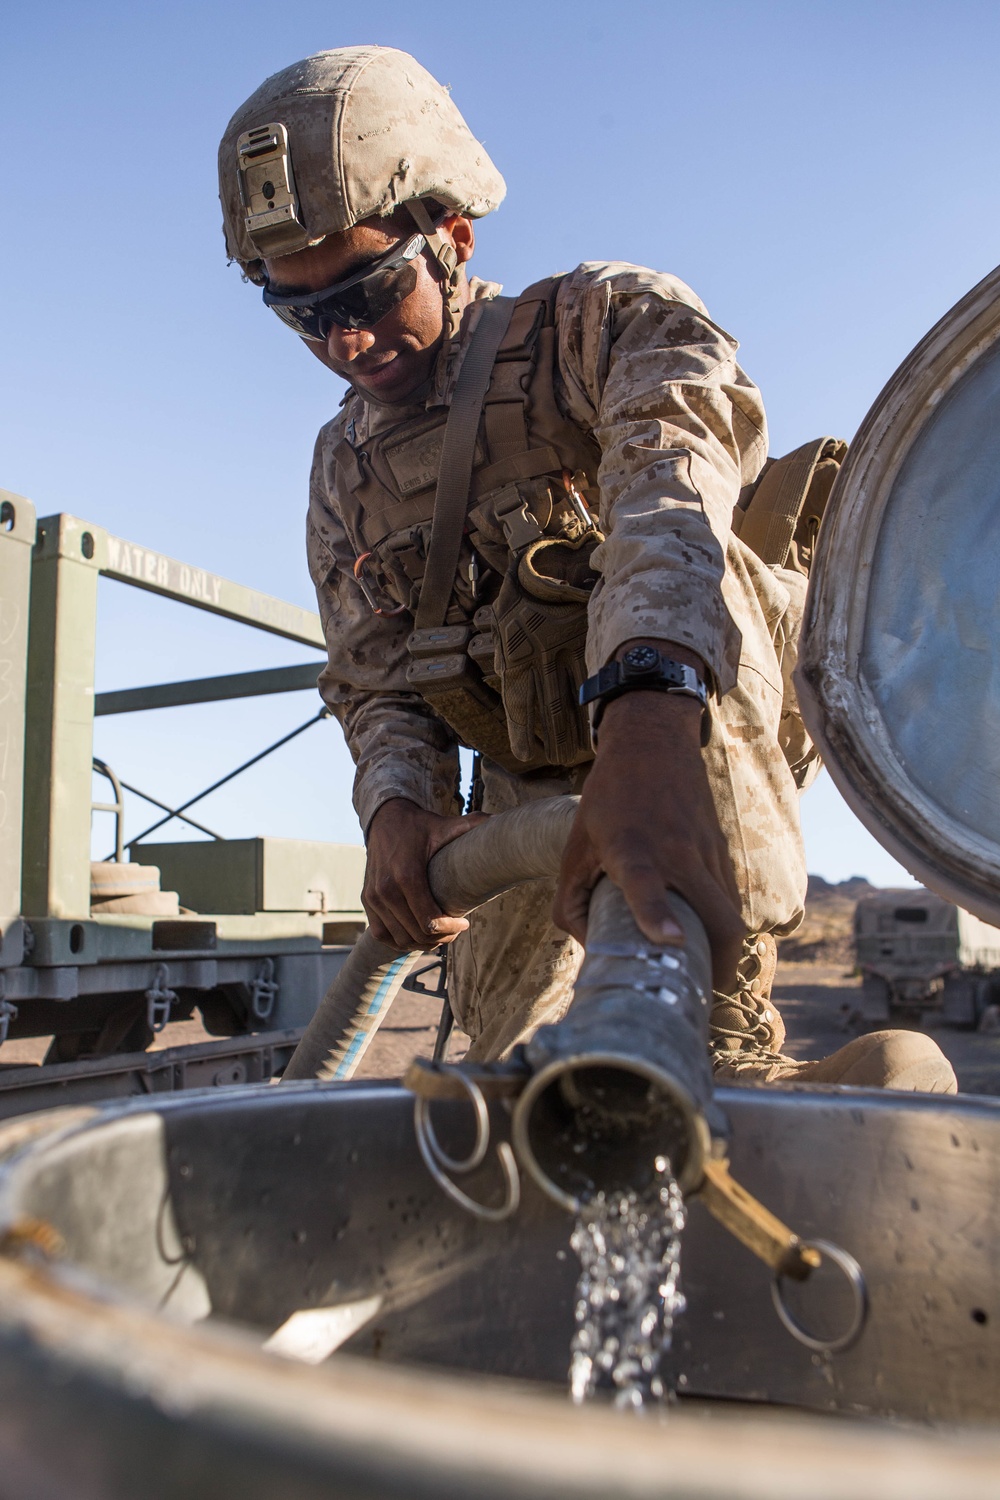 Combat Logistics Battalion 2 Rapid Resupply Points during Force-on-Force Training